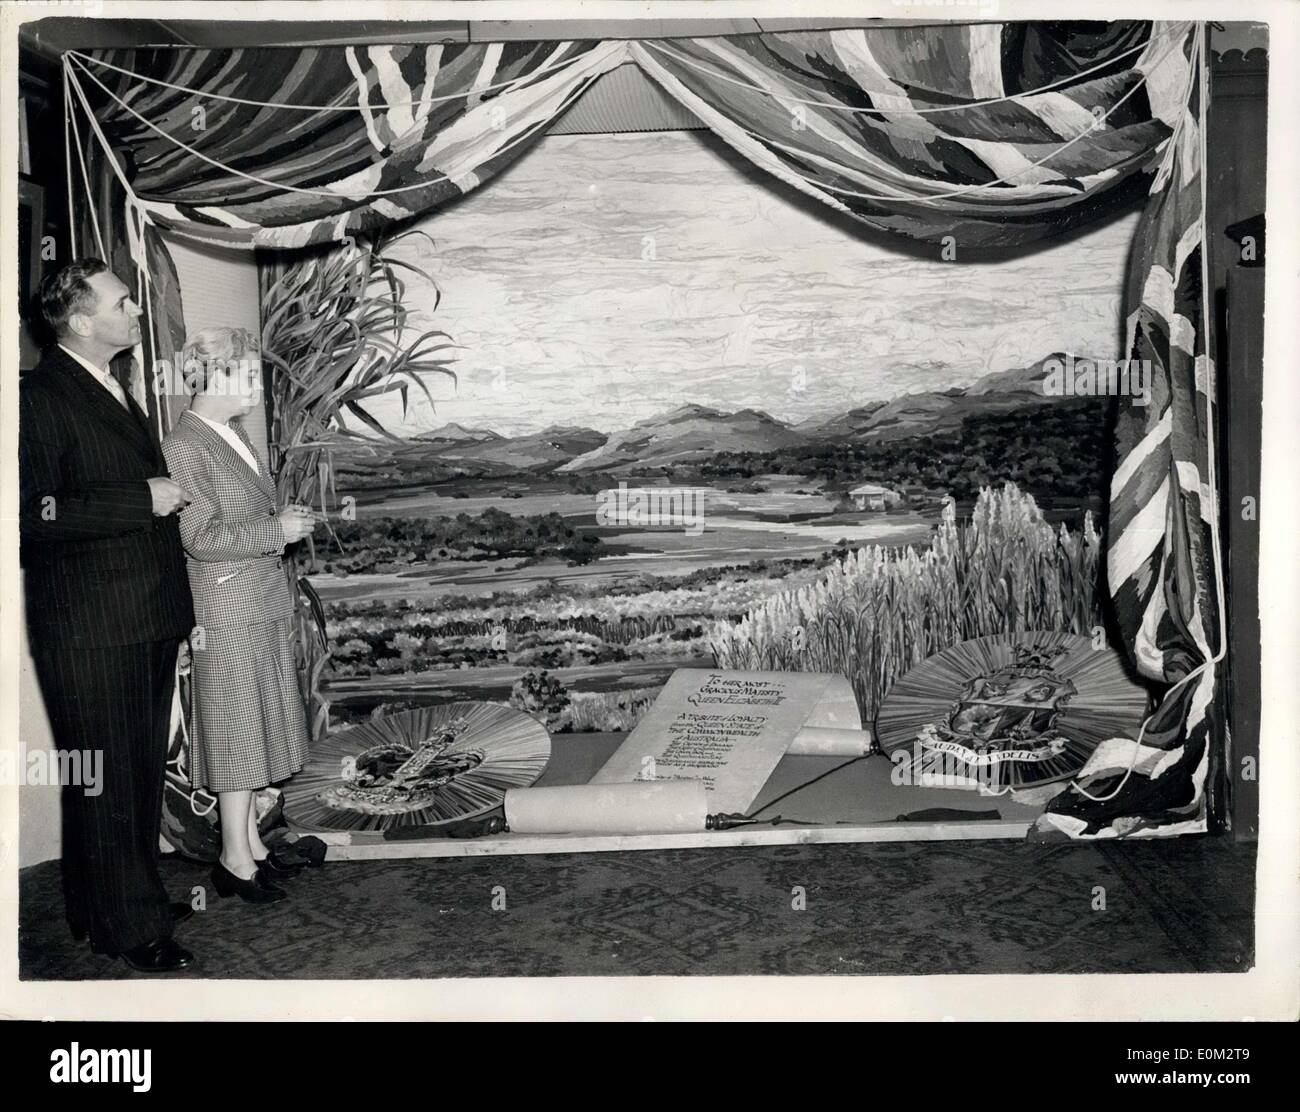 May 13, 1953 - Coronation Window Display By Australian Artists. Design In Wool At Queensland House: A press preview was held this afternoon at Queensland House, Strand - of the Coronation Window Display - the work in wool - by Australian artist Edith Kenton from Adelaide. Photo shows Edith Kenton stands with the Australian Agent General David John Muir - at Queensland House this afternoon. The whole display, including the flag drapings - the picture and the badges and emblems are all worked in wool. Stock Photo